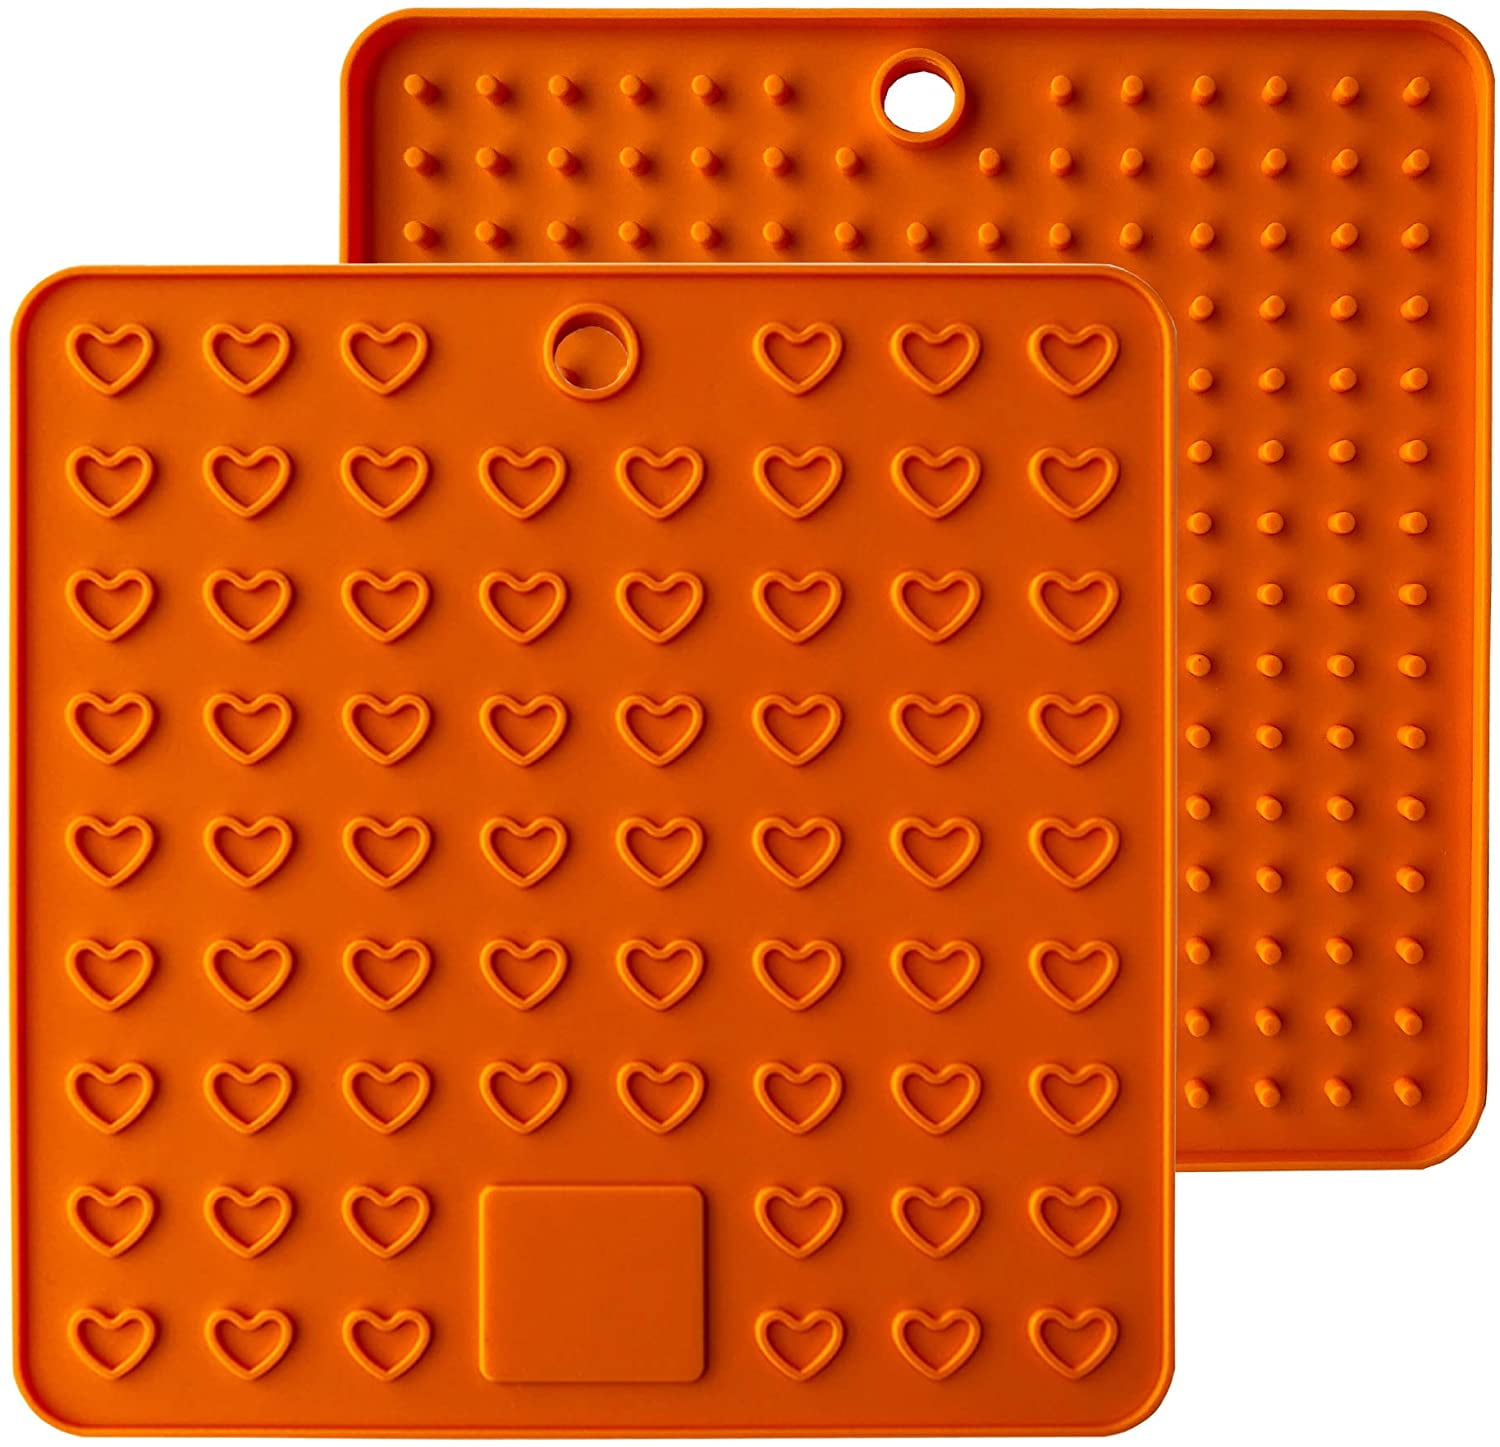 Silicone Grid Trivet Pot Holder - Silicone Zone Life is Art!